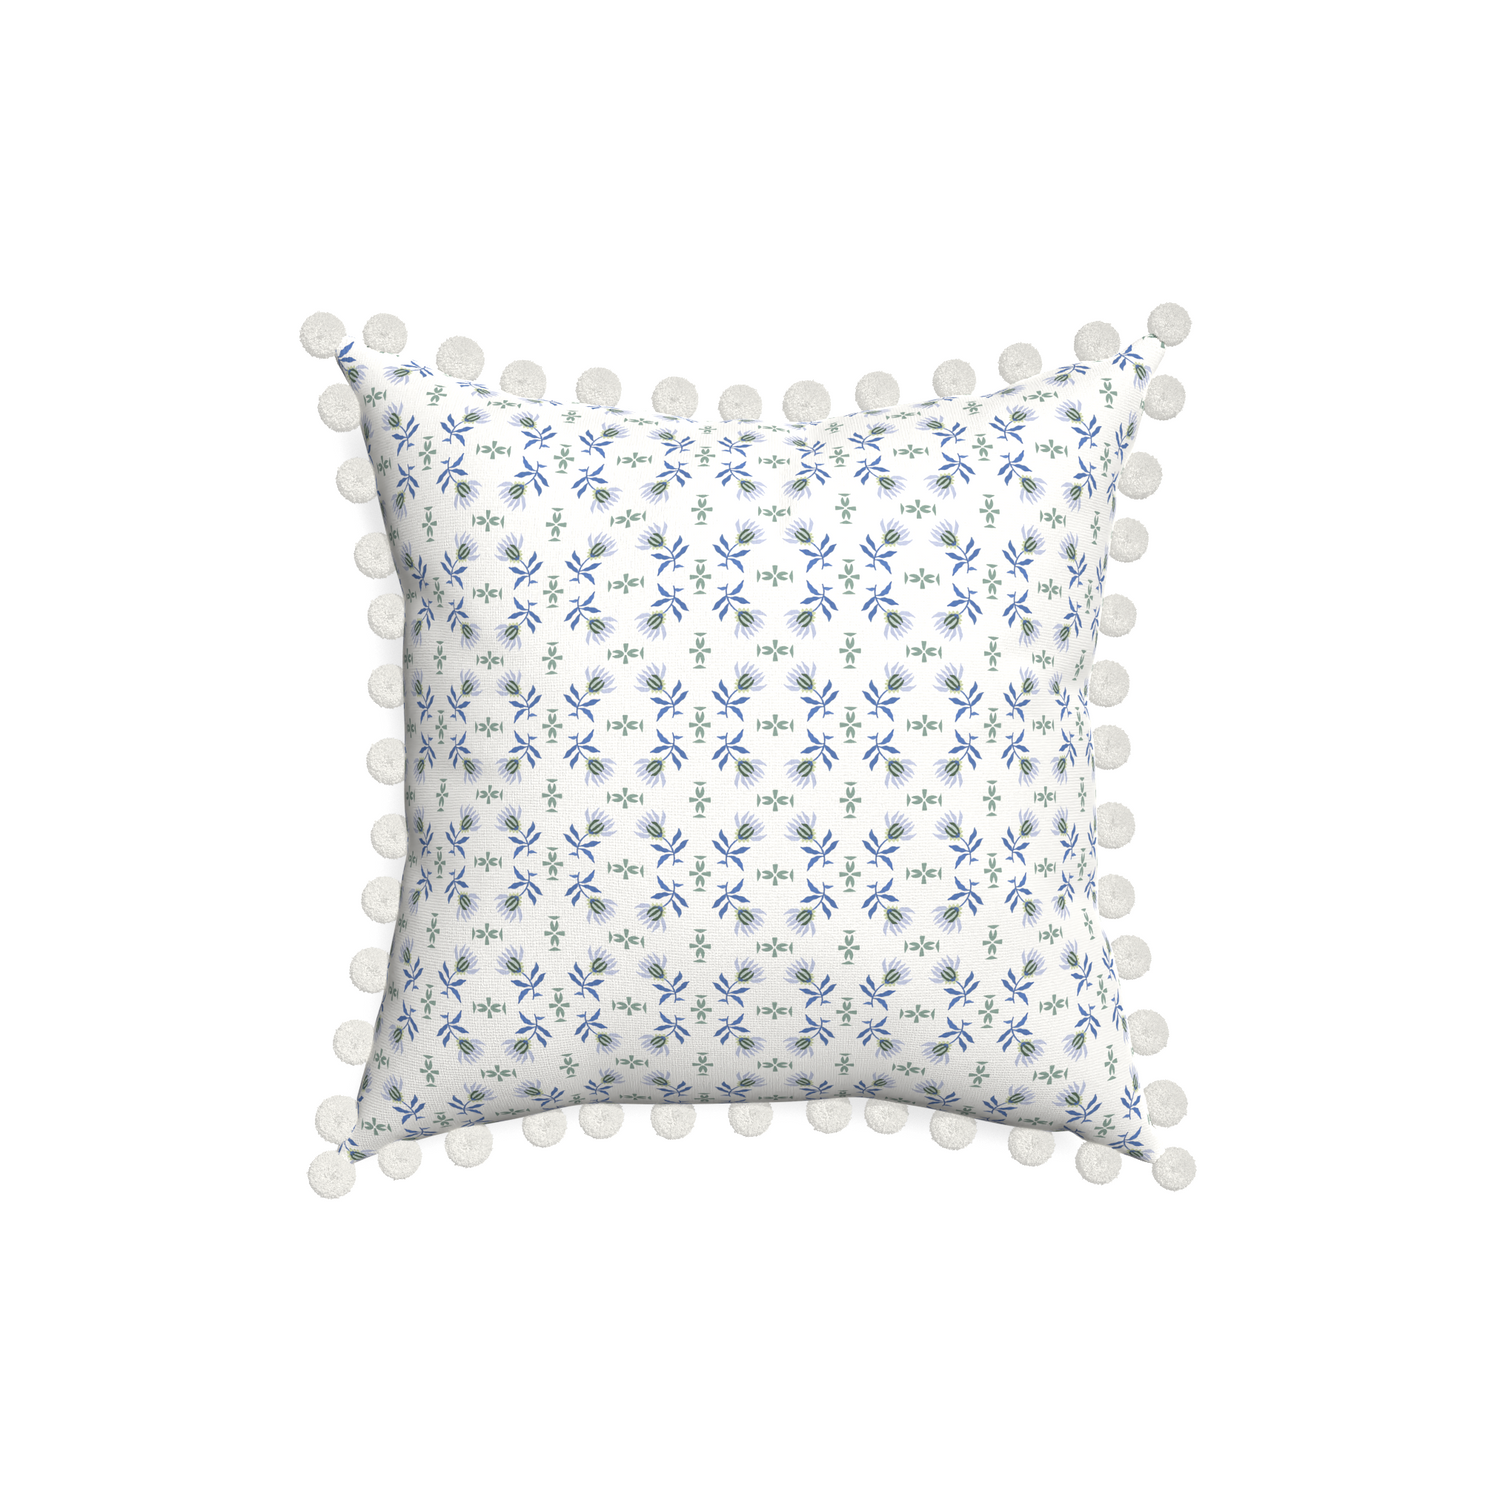 18-square lee custom pillow with snow pom pom on white background